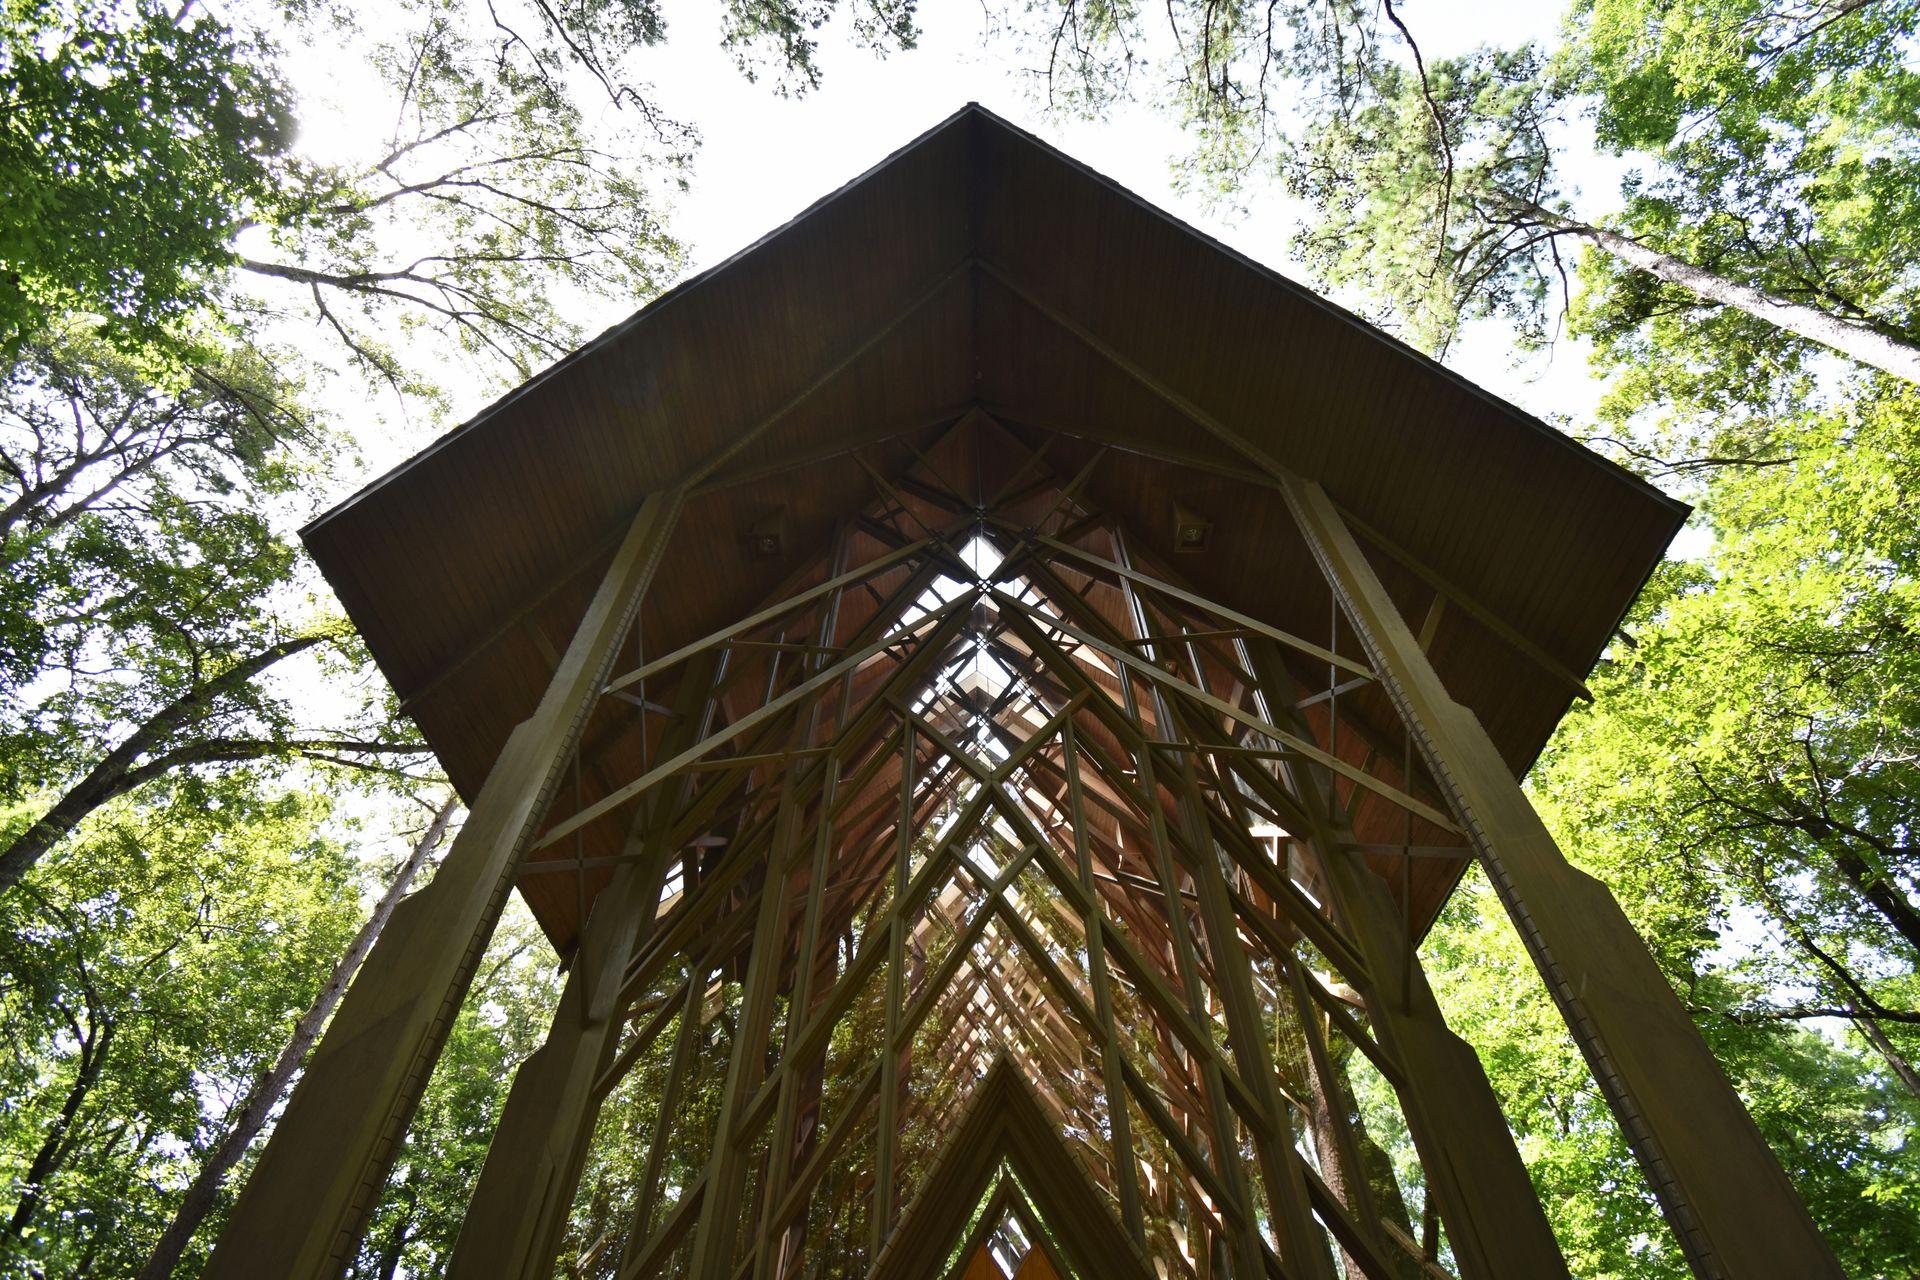 Looking up at the glass chapel at Garven Woodland Gardens. The chapel is surrounded by trees.